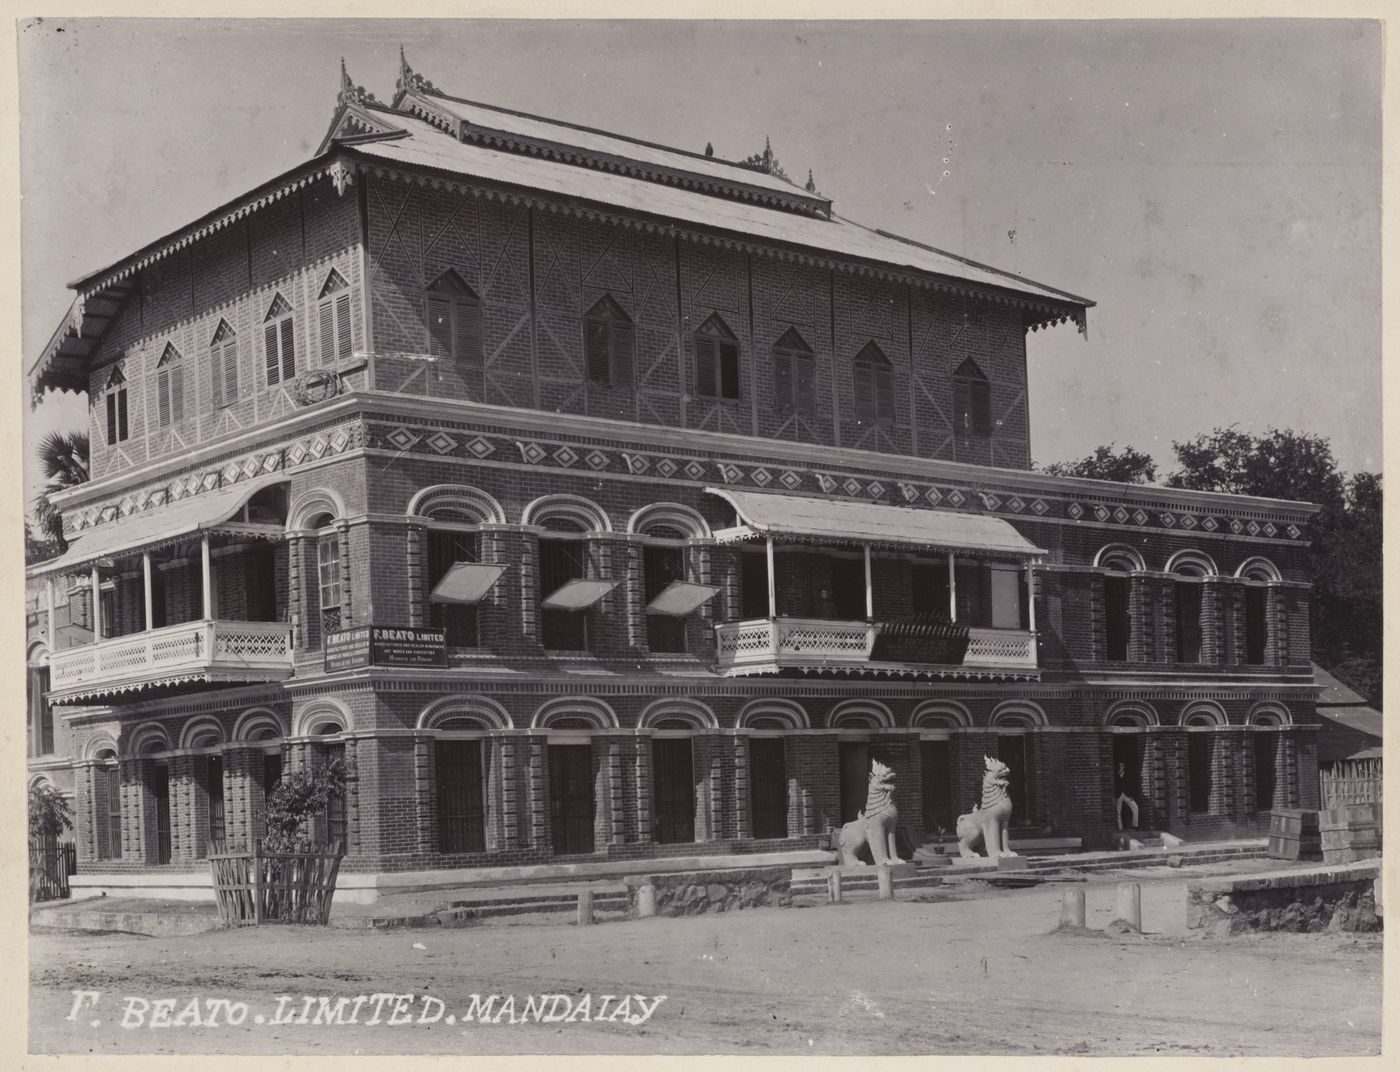 View of F. Beato Limited, C Road, Mandalay, Burma (now Myanmar)